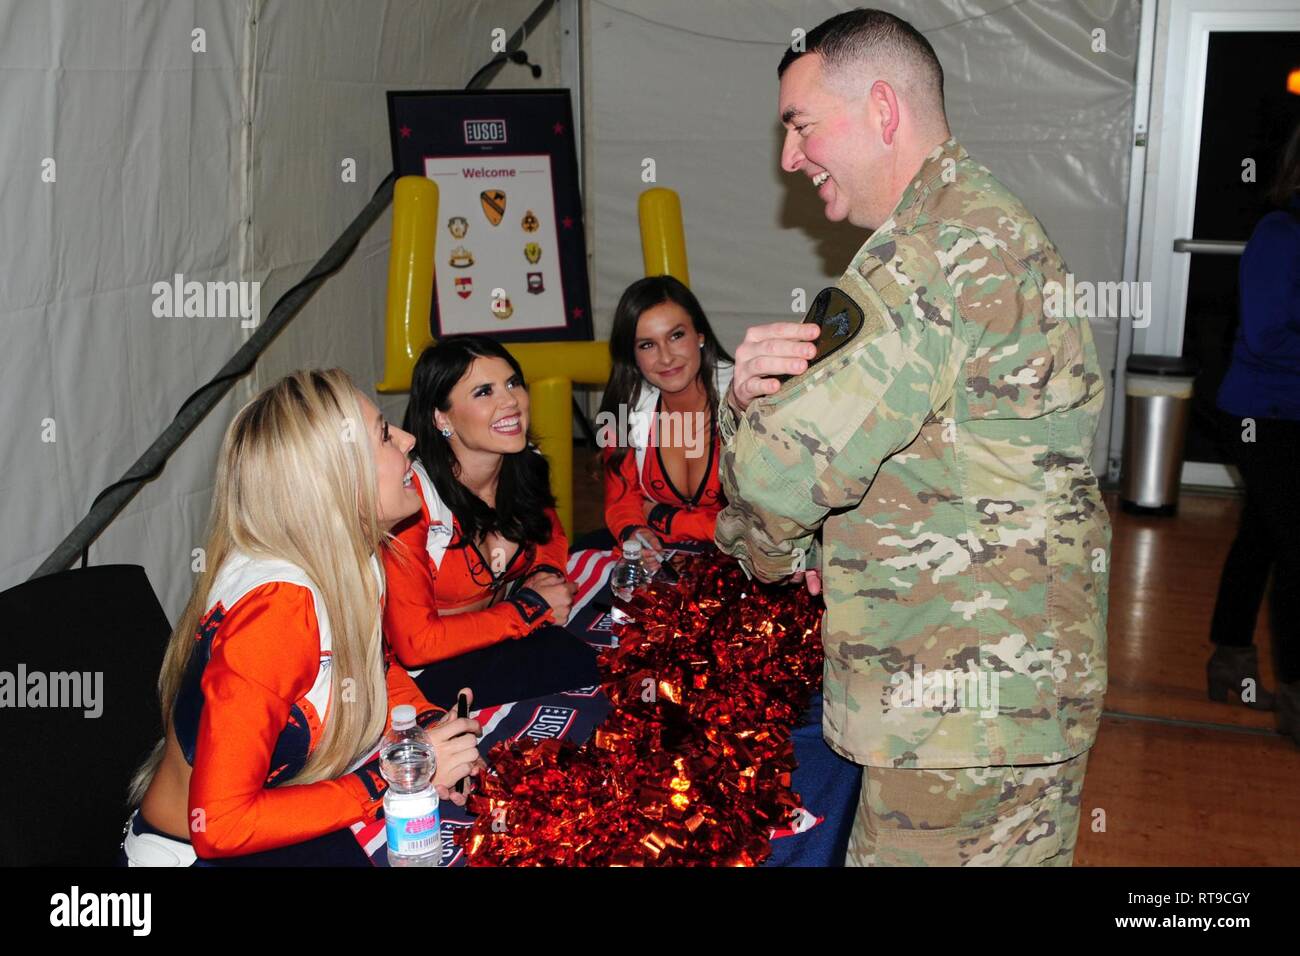 U.S. Army Chief Warrant Officer 3 Michael Hamilton assigned to the 1st Armored Brigade Combat Team, 1st Cavalry Division chats with cheerleaders about his 1st Cavalry patch as part of a USO meet and greet with the Denver Broncos cheerleaders, mascot and Alumni football players at Camp Aachen's USO annex in Grafenwoehr, Germany, Jan. 26, 2019. IRONHORSE deployed in support of Atlantic Resolve, an enduring exercise to improve interoperability between U.S. Forces, their NATO allies and partners. Stock Photo